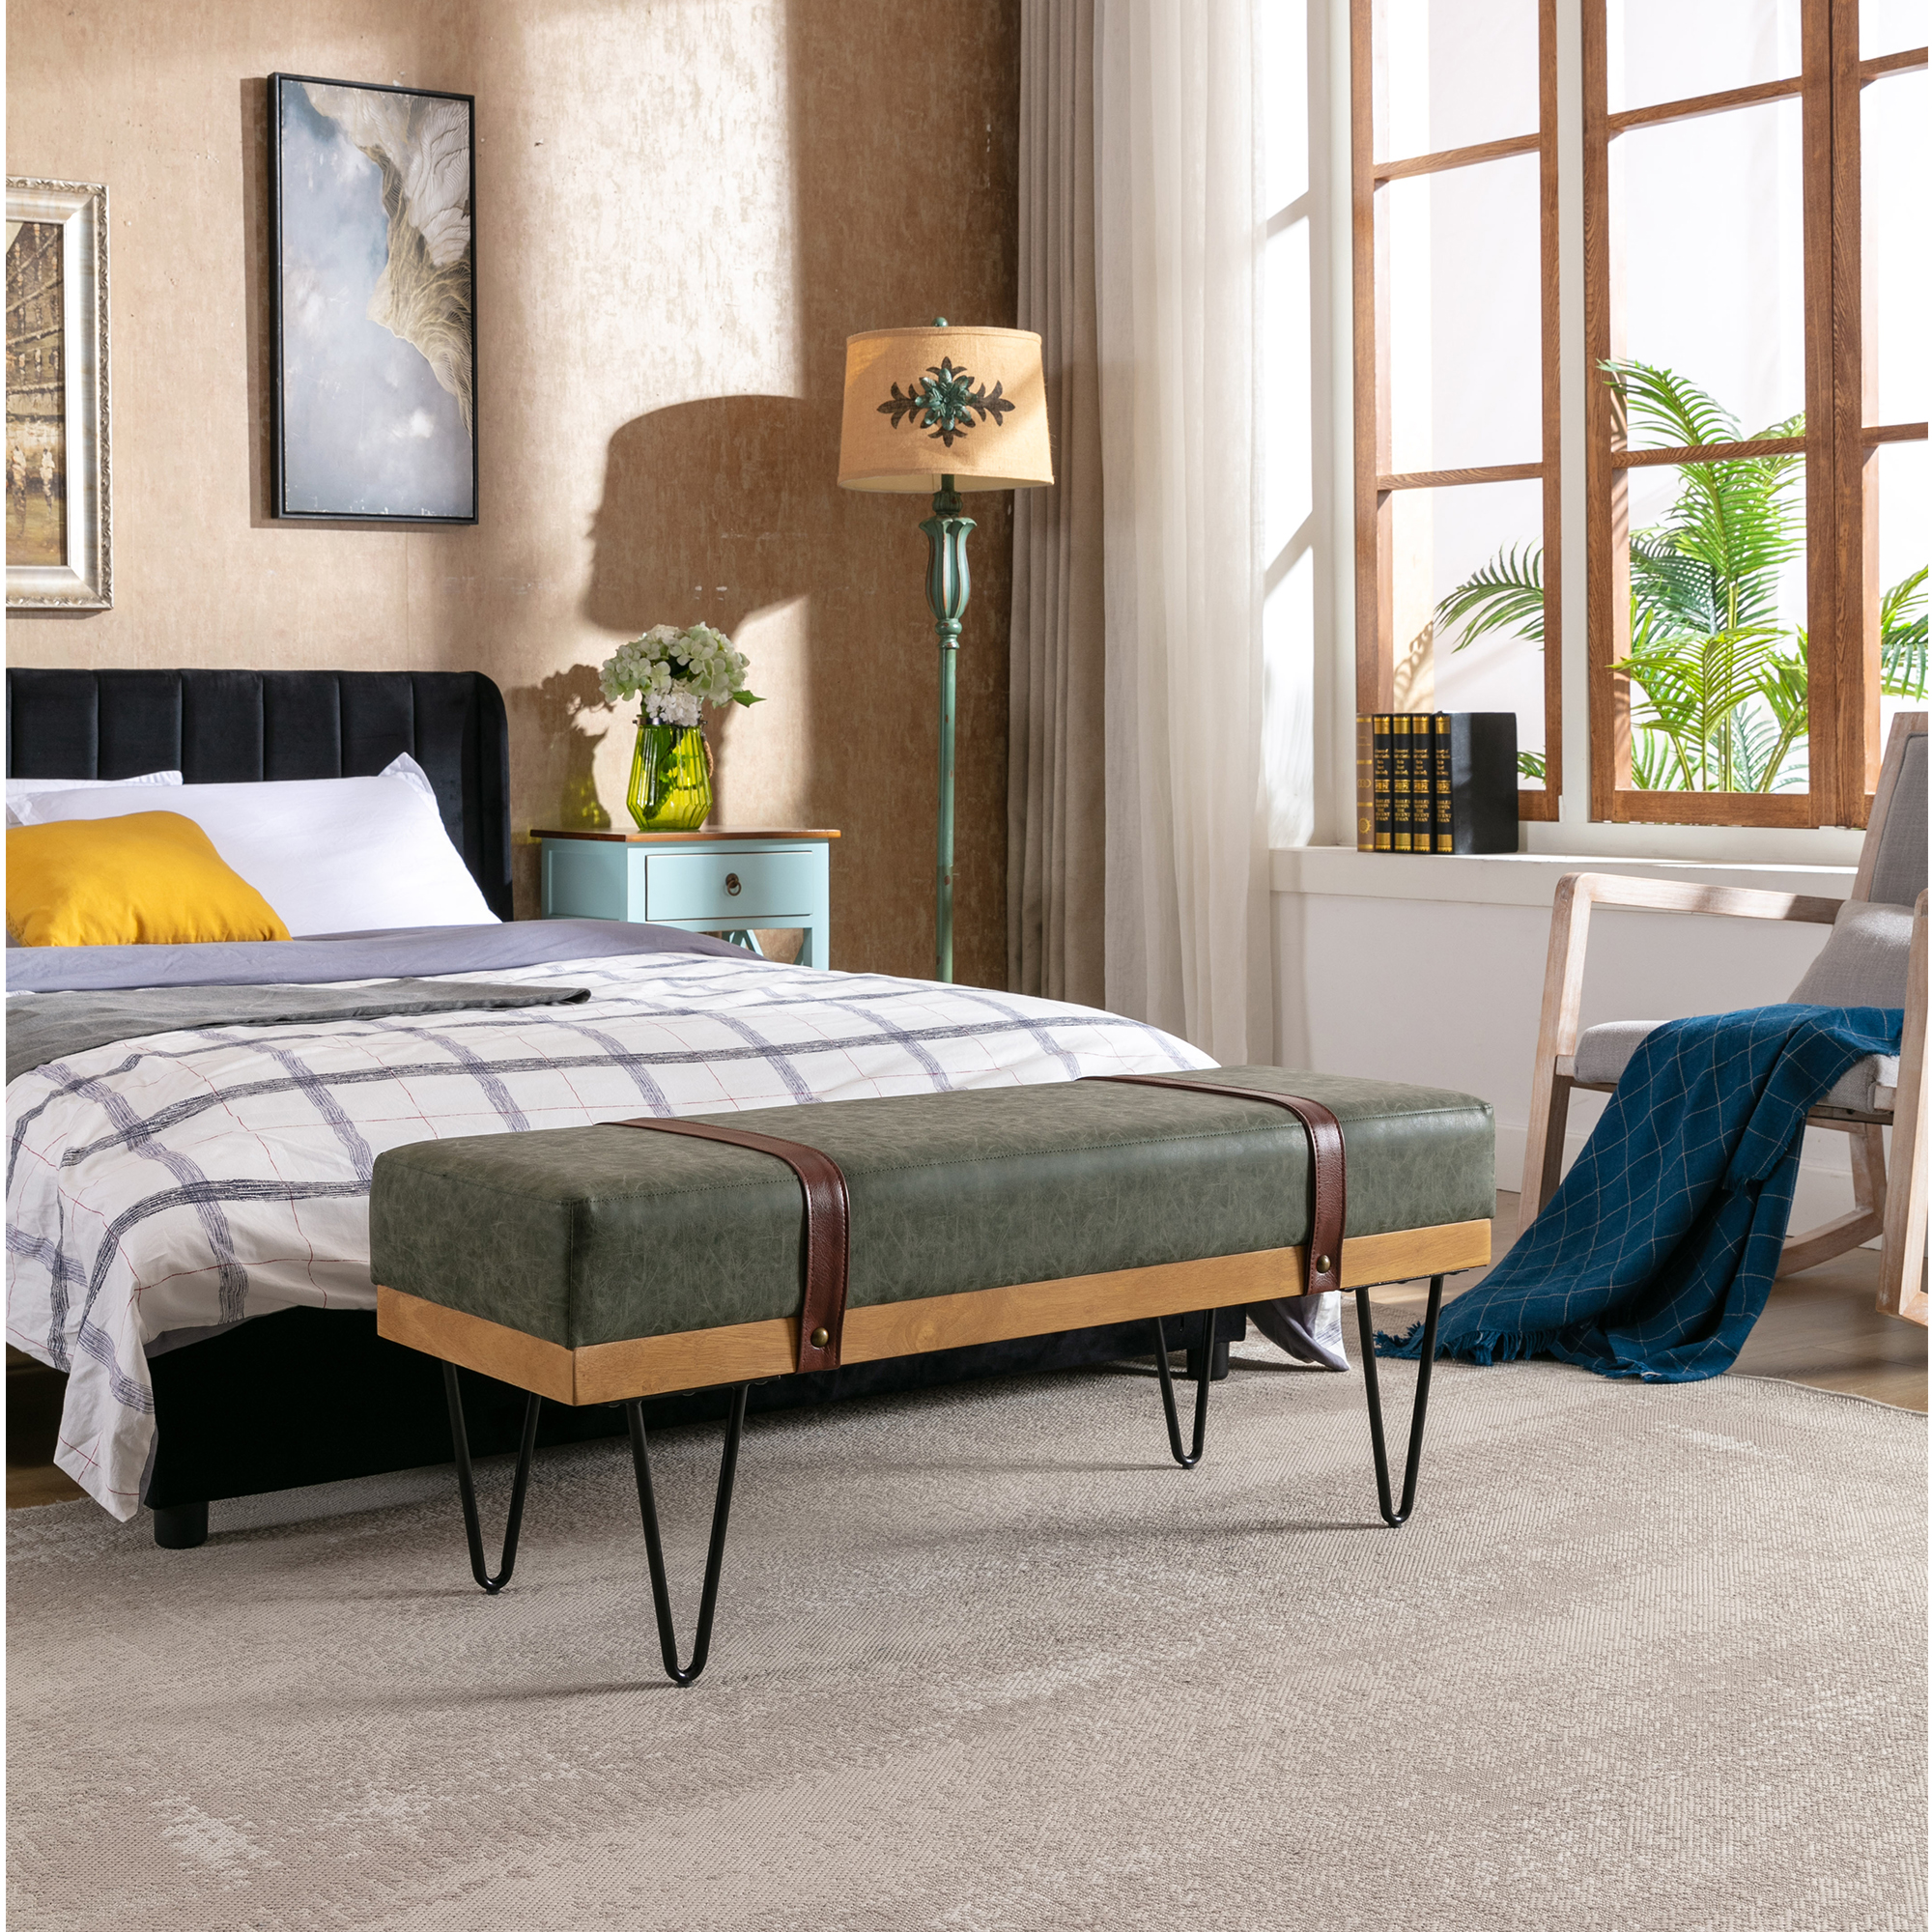 Faux leather soft cushion Upholstered solid wood frame Rectangle bed bench with powder coating metal legs ,Entryway footstool-Boyel Living